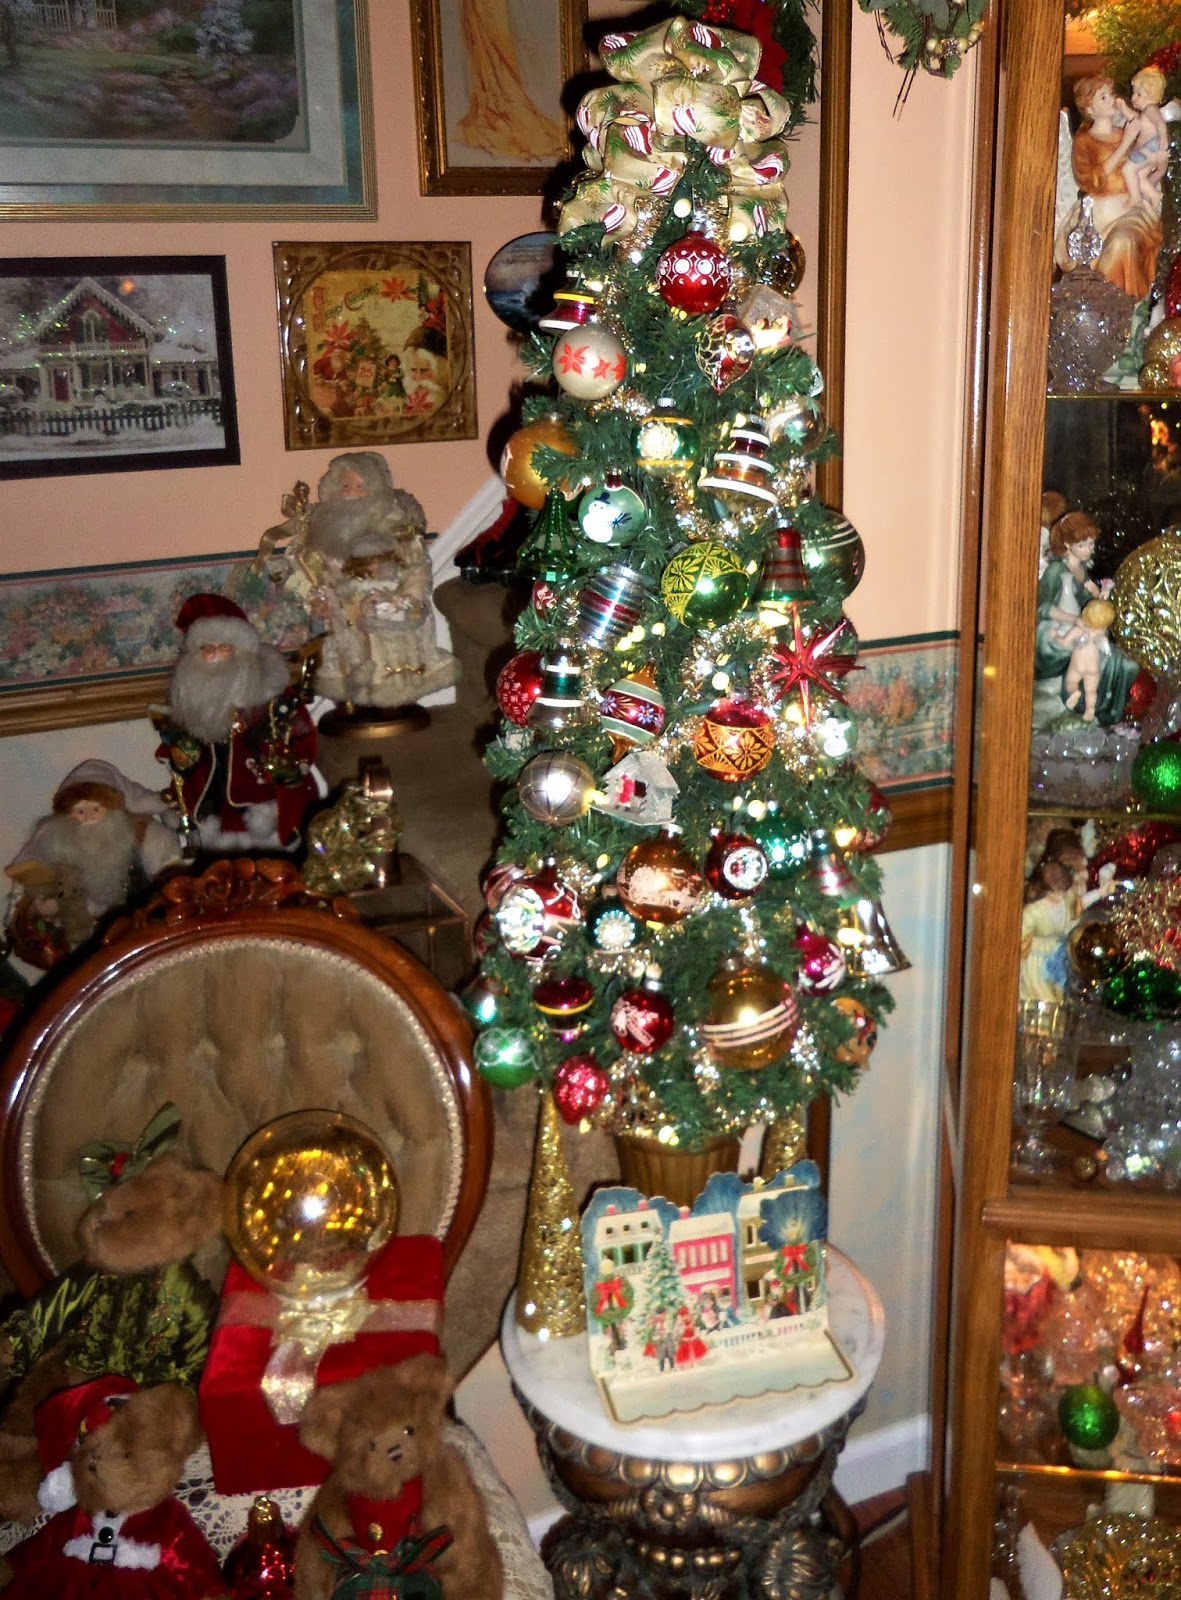 A DEBBIE-DABBLE CHRISTMAS: Victorian Tree and Village in the Living Room,  2019